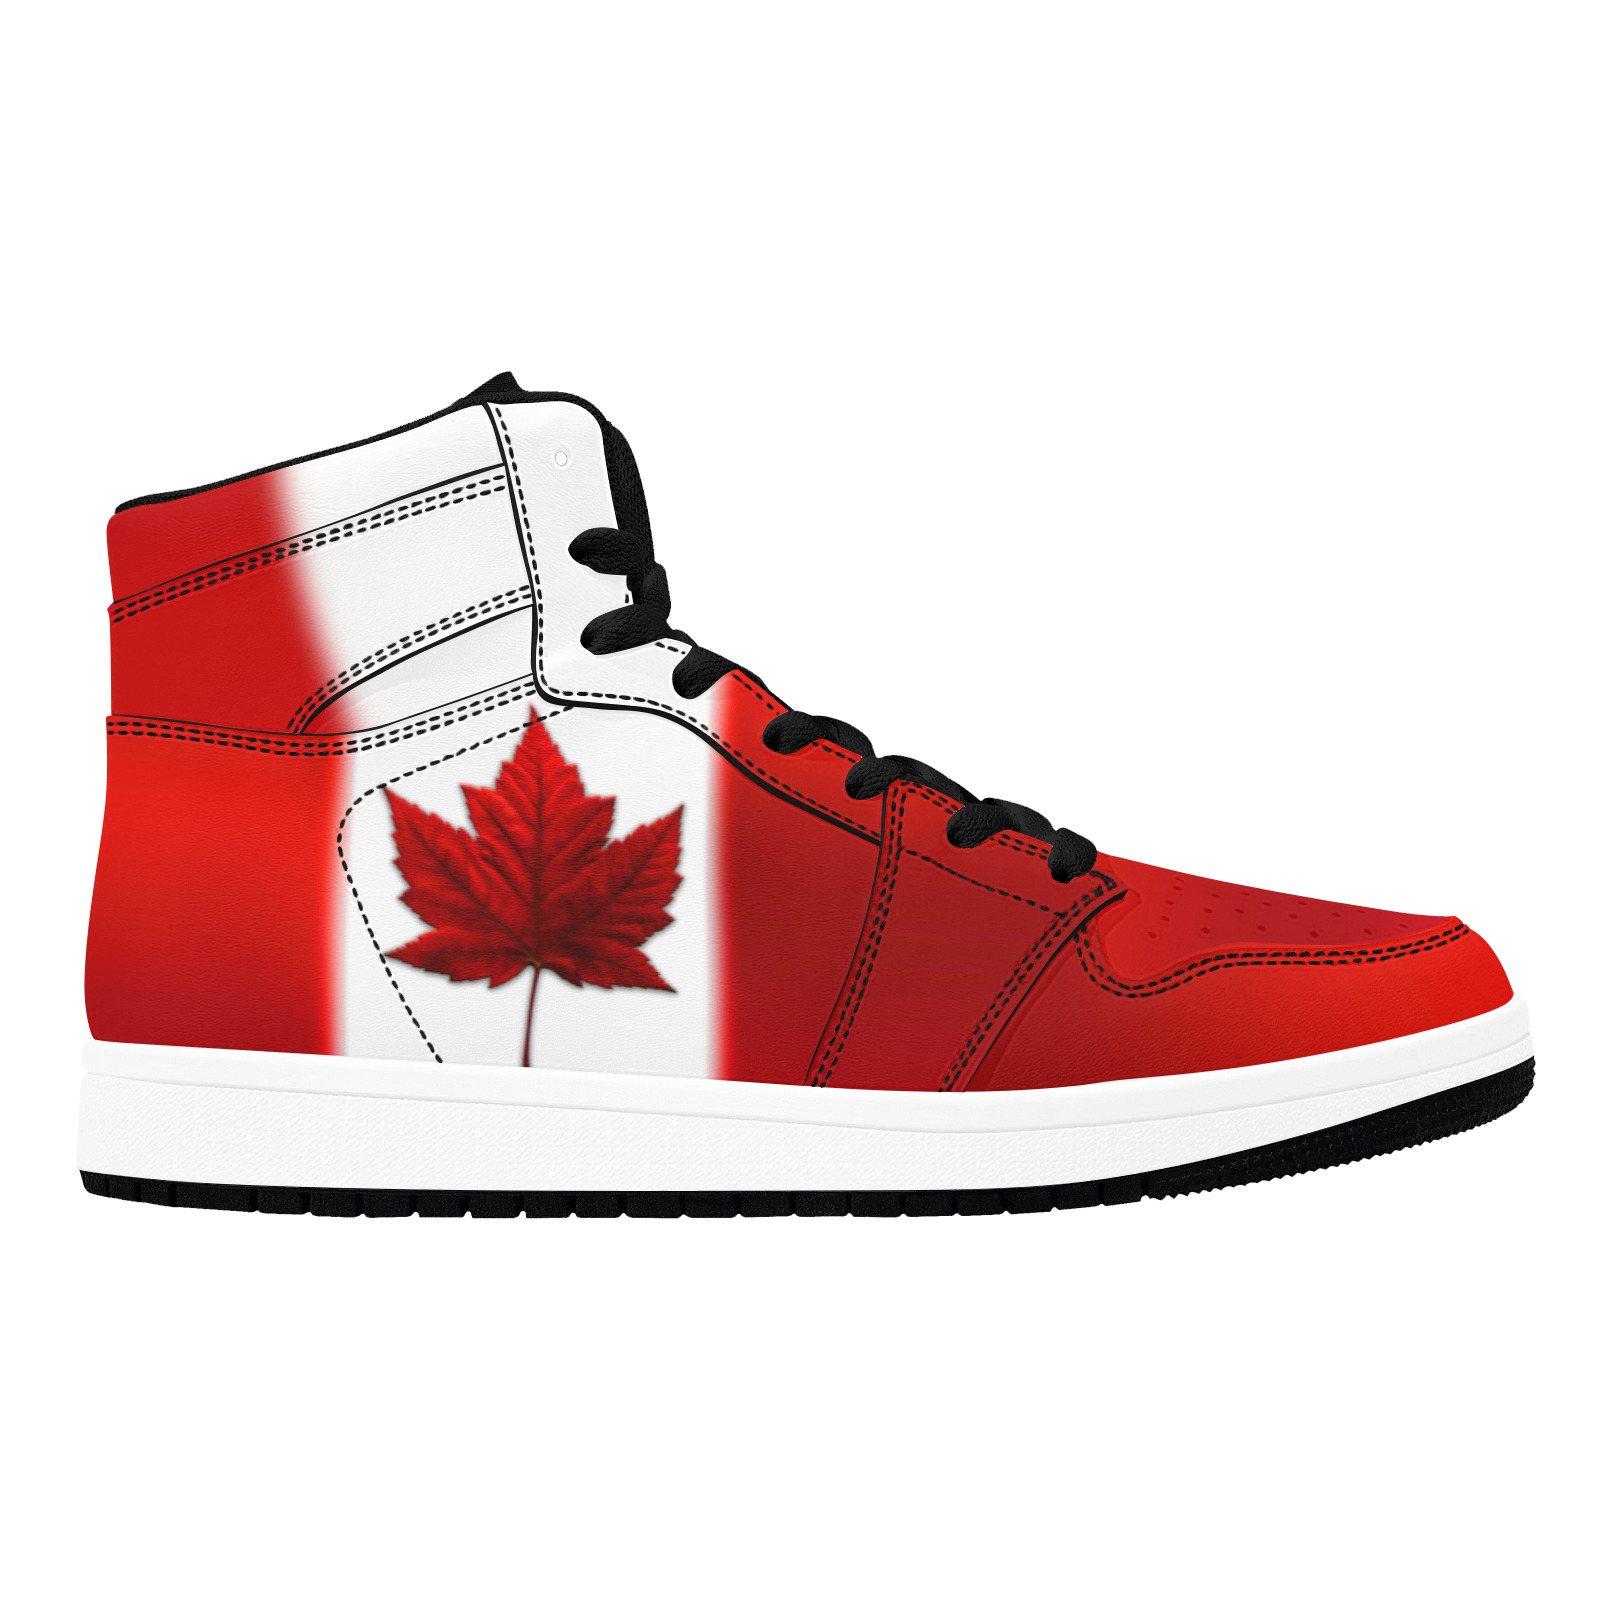 Canada Flag Sneakers Running Shoes Unisex High Top Sneakers (Model 20042)